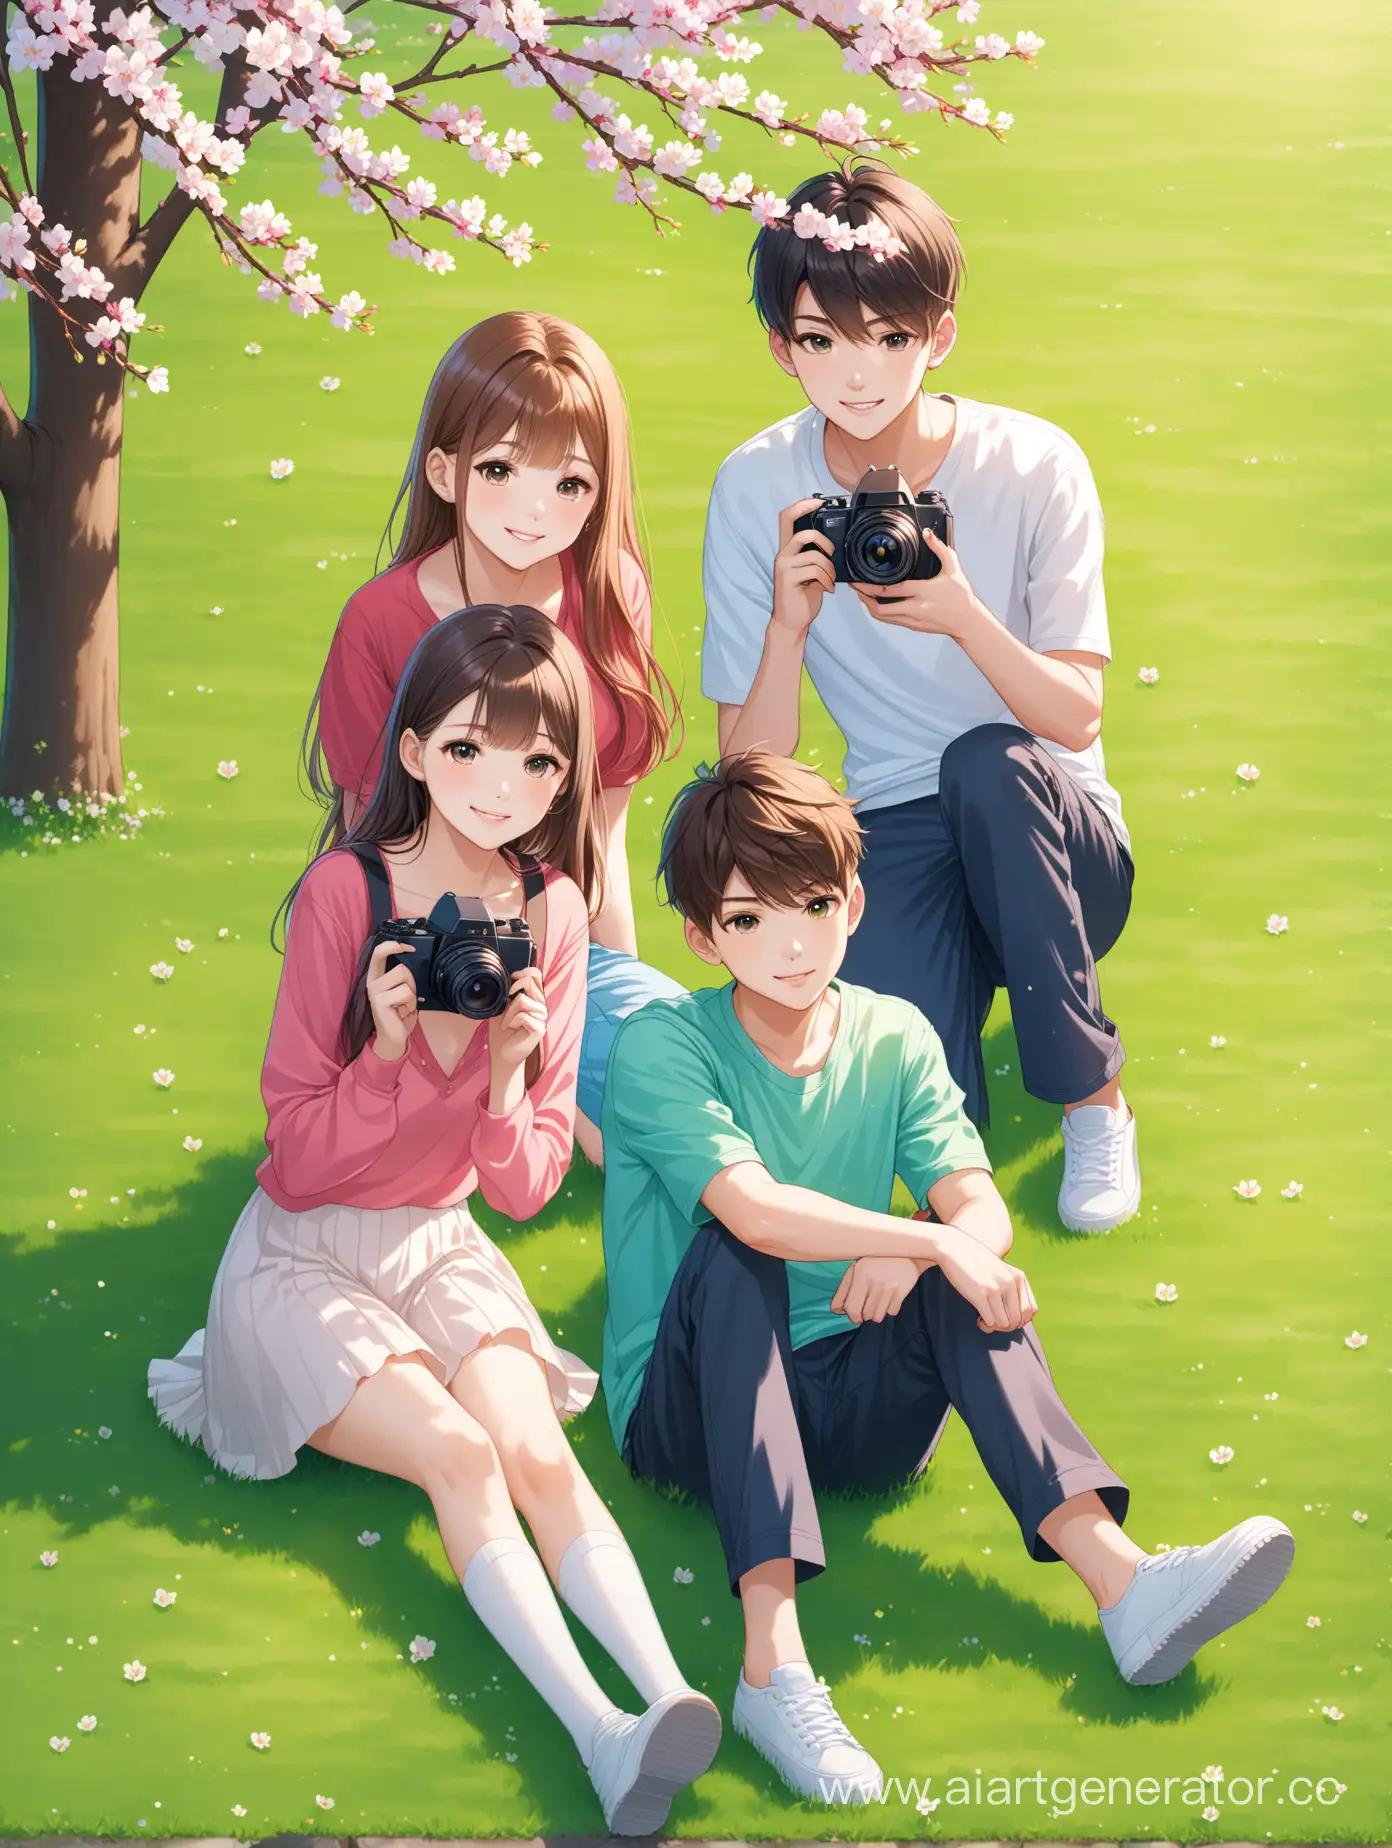 Teenage-Friends-Capturing-Spring-Moments-on-Lawn